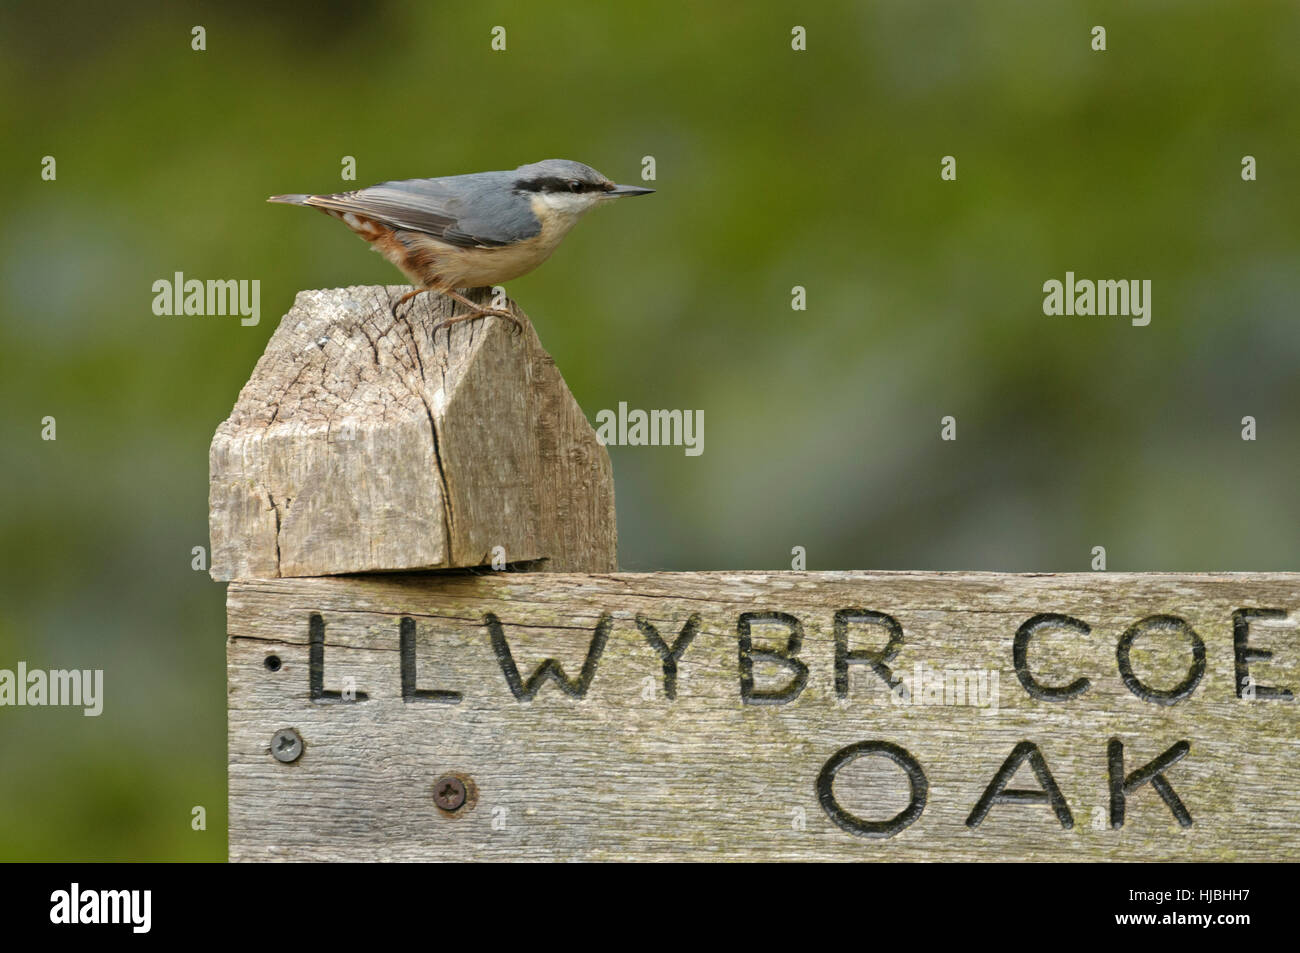 Nuthatch (Sitta europaea) perched on signpost in oak woodland nature reserve. Gilfach, Radnorshire, Wales. May. Stock Photo